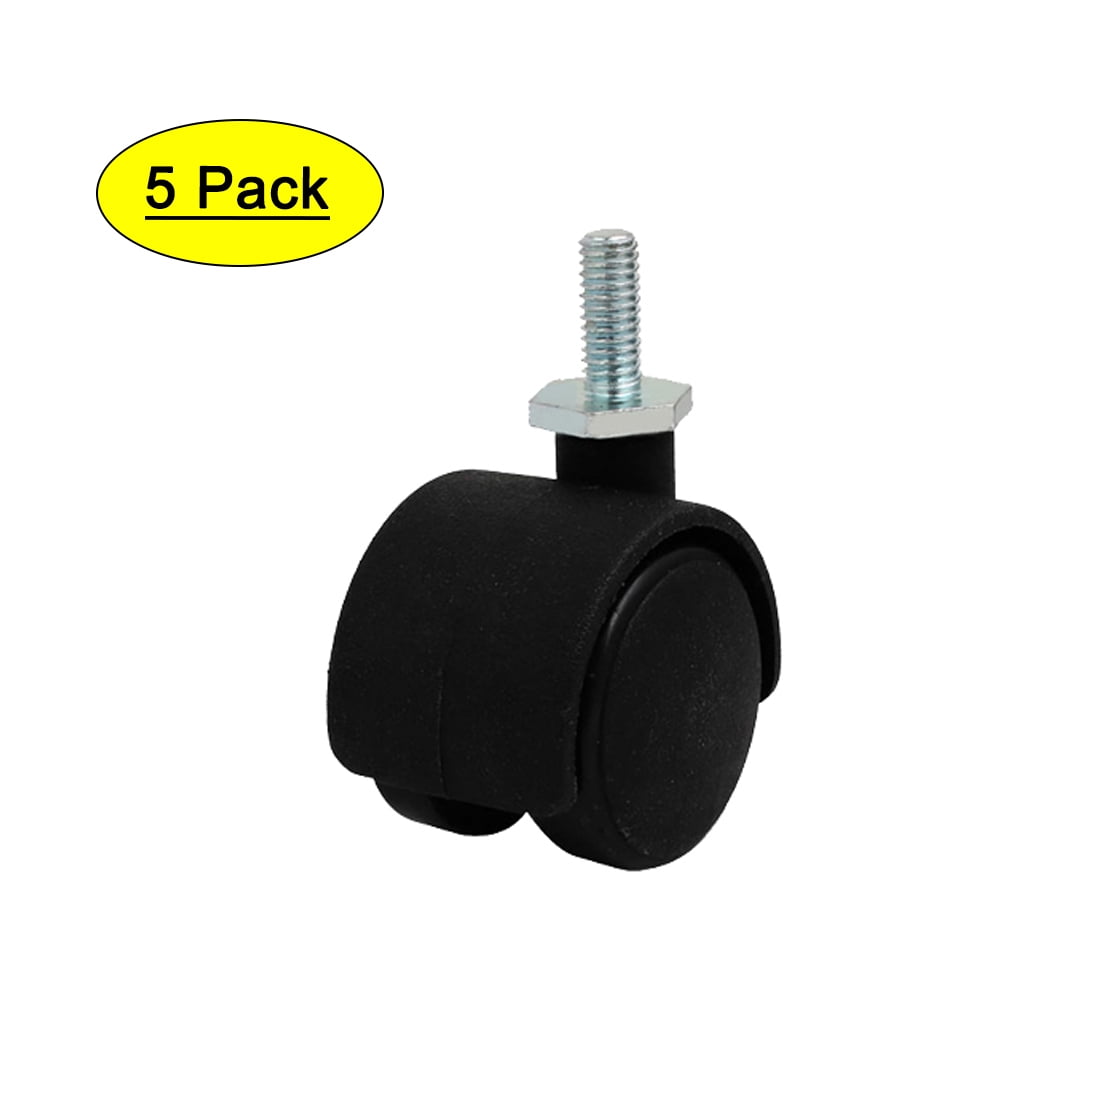 1inch Swivel Caster Wheels M6 Thread Stem Mount Trolley Casters Replacement 